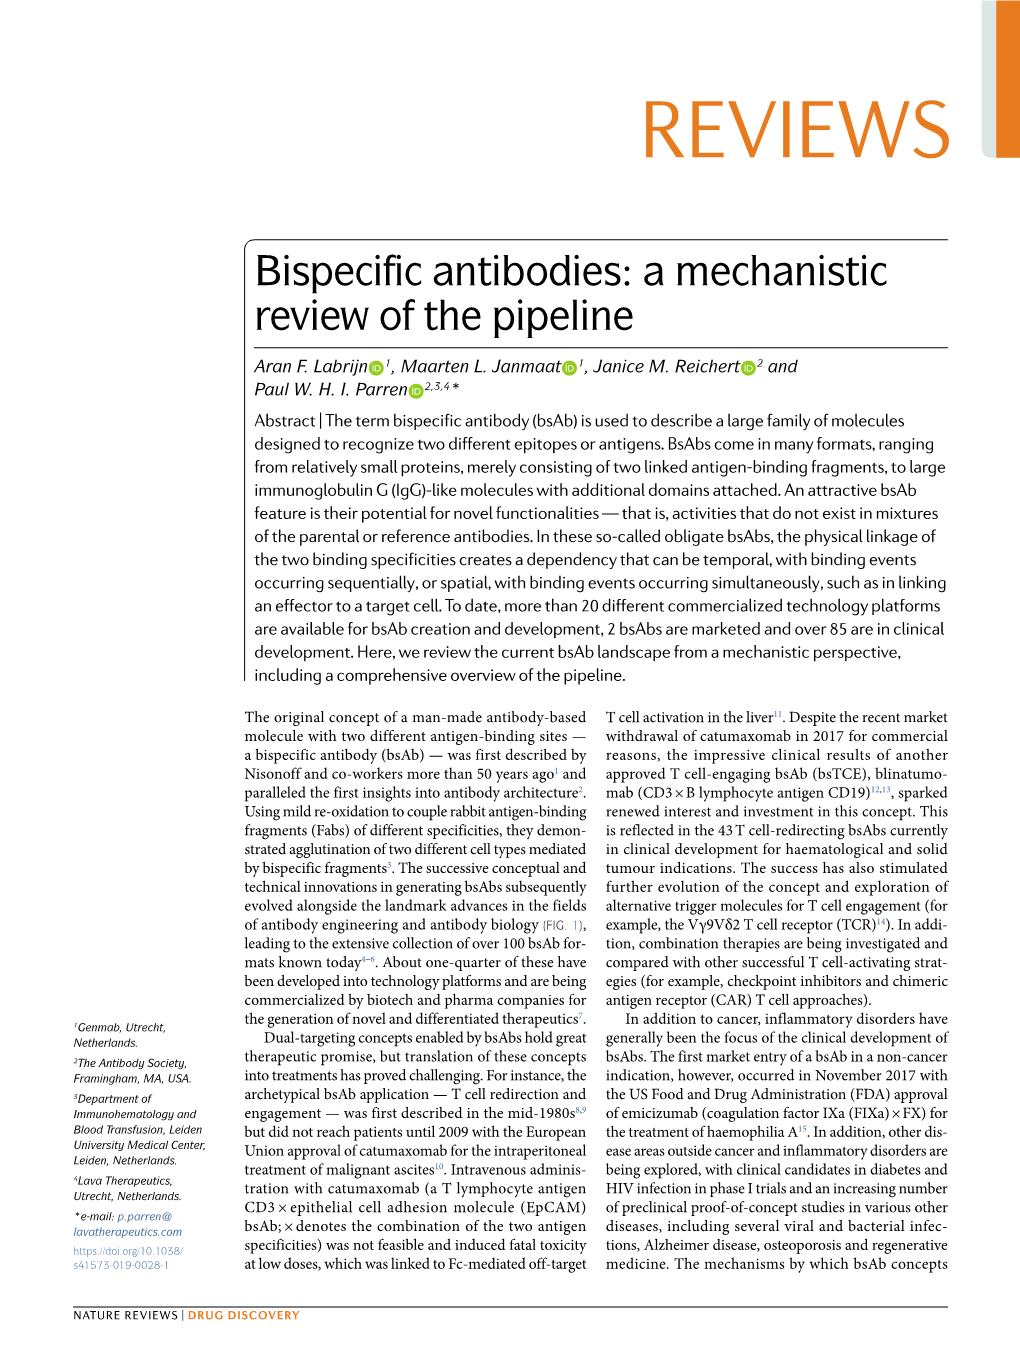 Bispecific Antibodies: a Mechanistic Review of the Pipeline